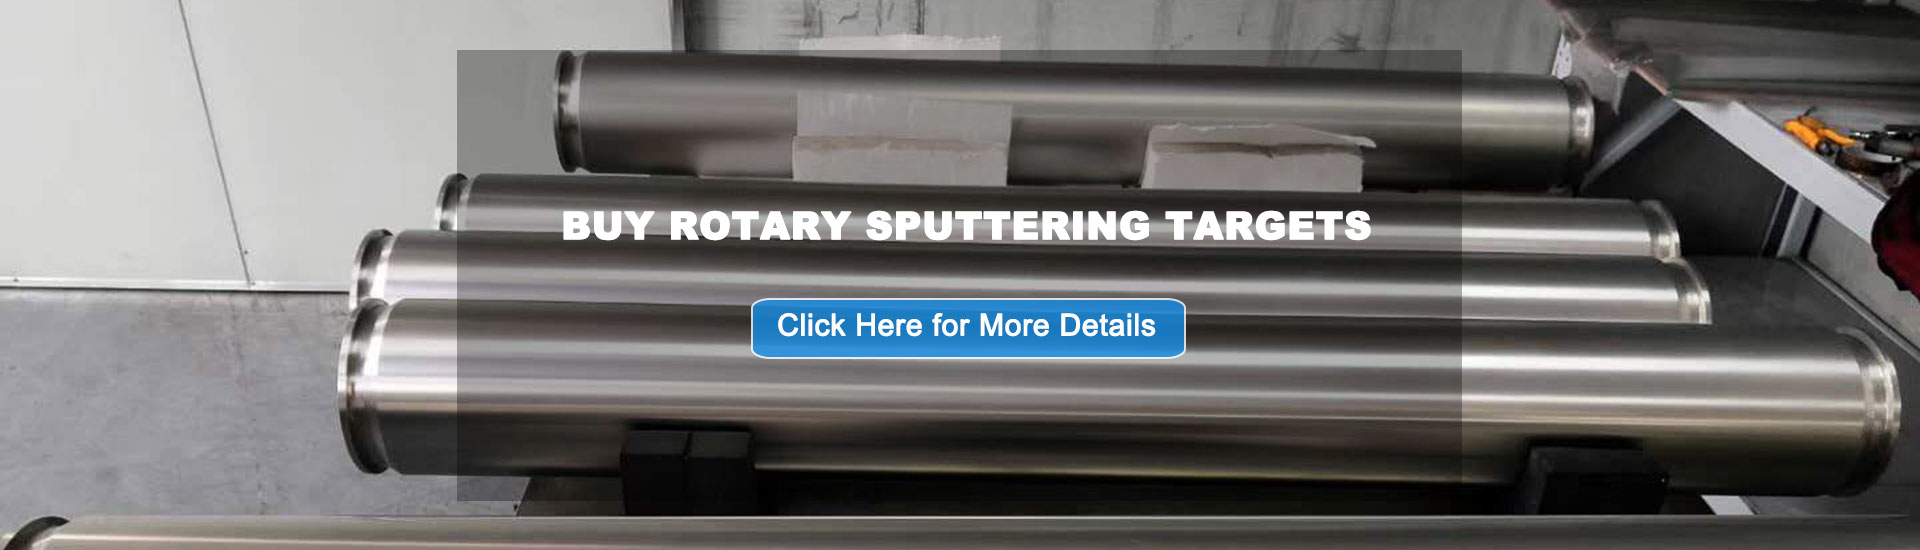 Over 10+ years experiences of Manufacturing Rotary Sputtering Targets !AEM produces all kinds of high purity and customized sizes Rotary Sputtering Targets according to customer's requirements.